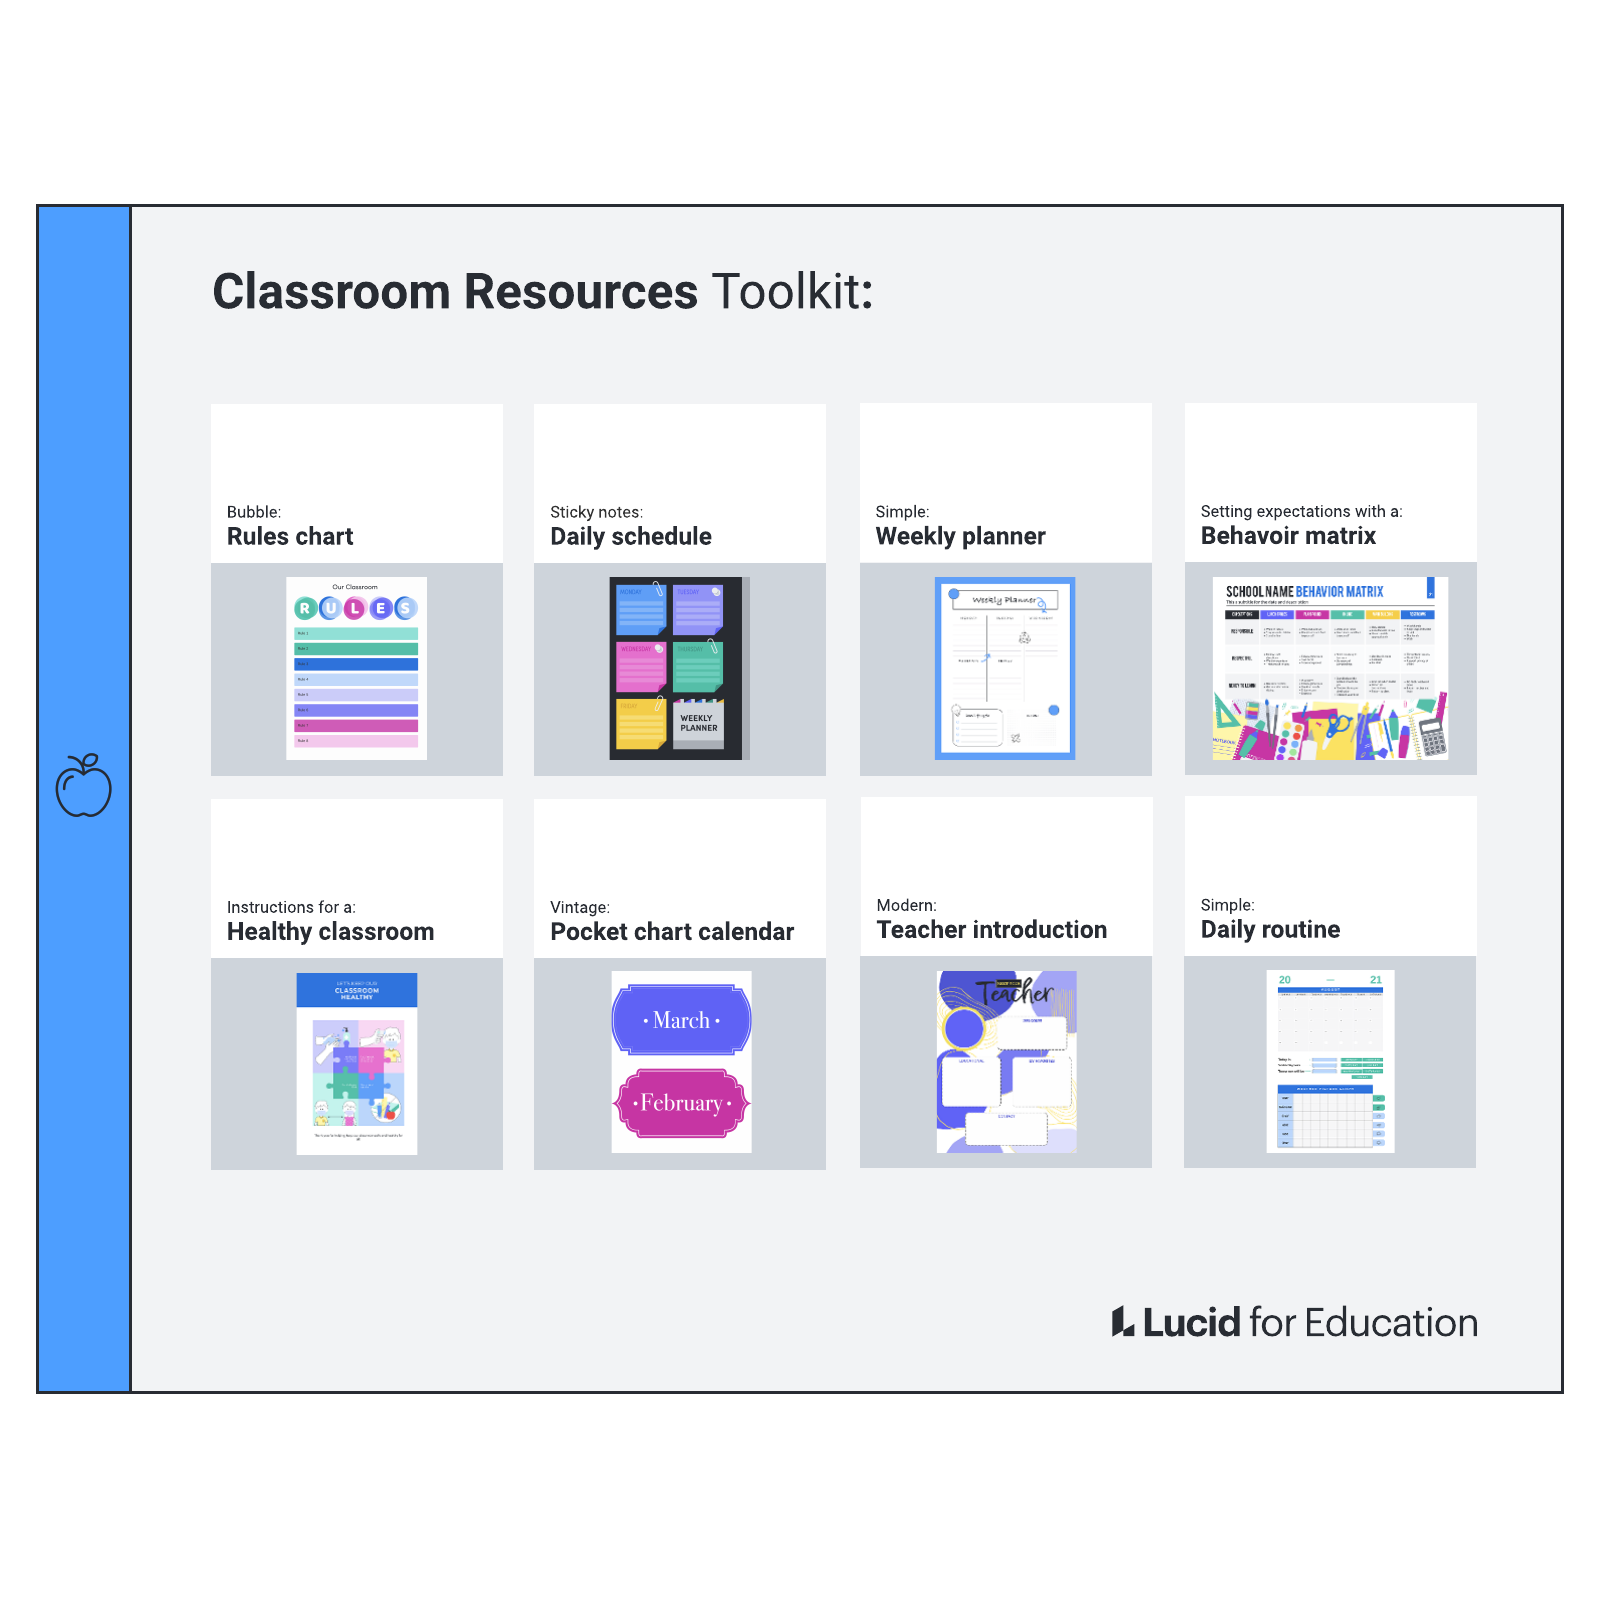 Classroom Resources Toolkit example